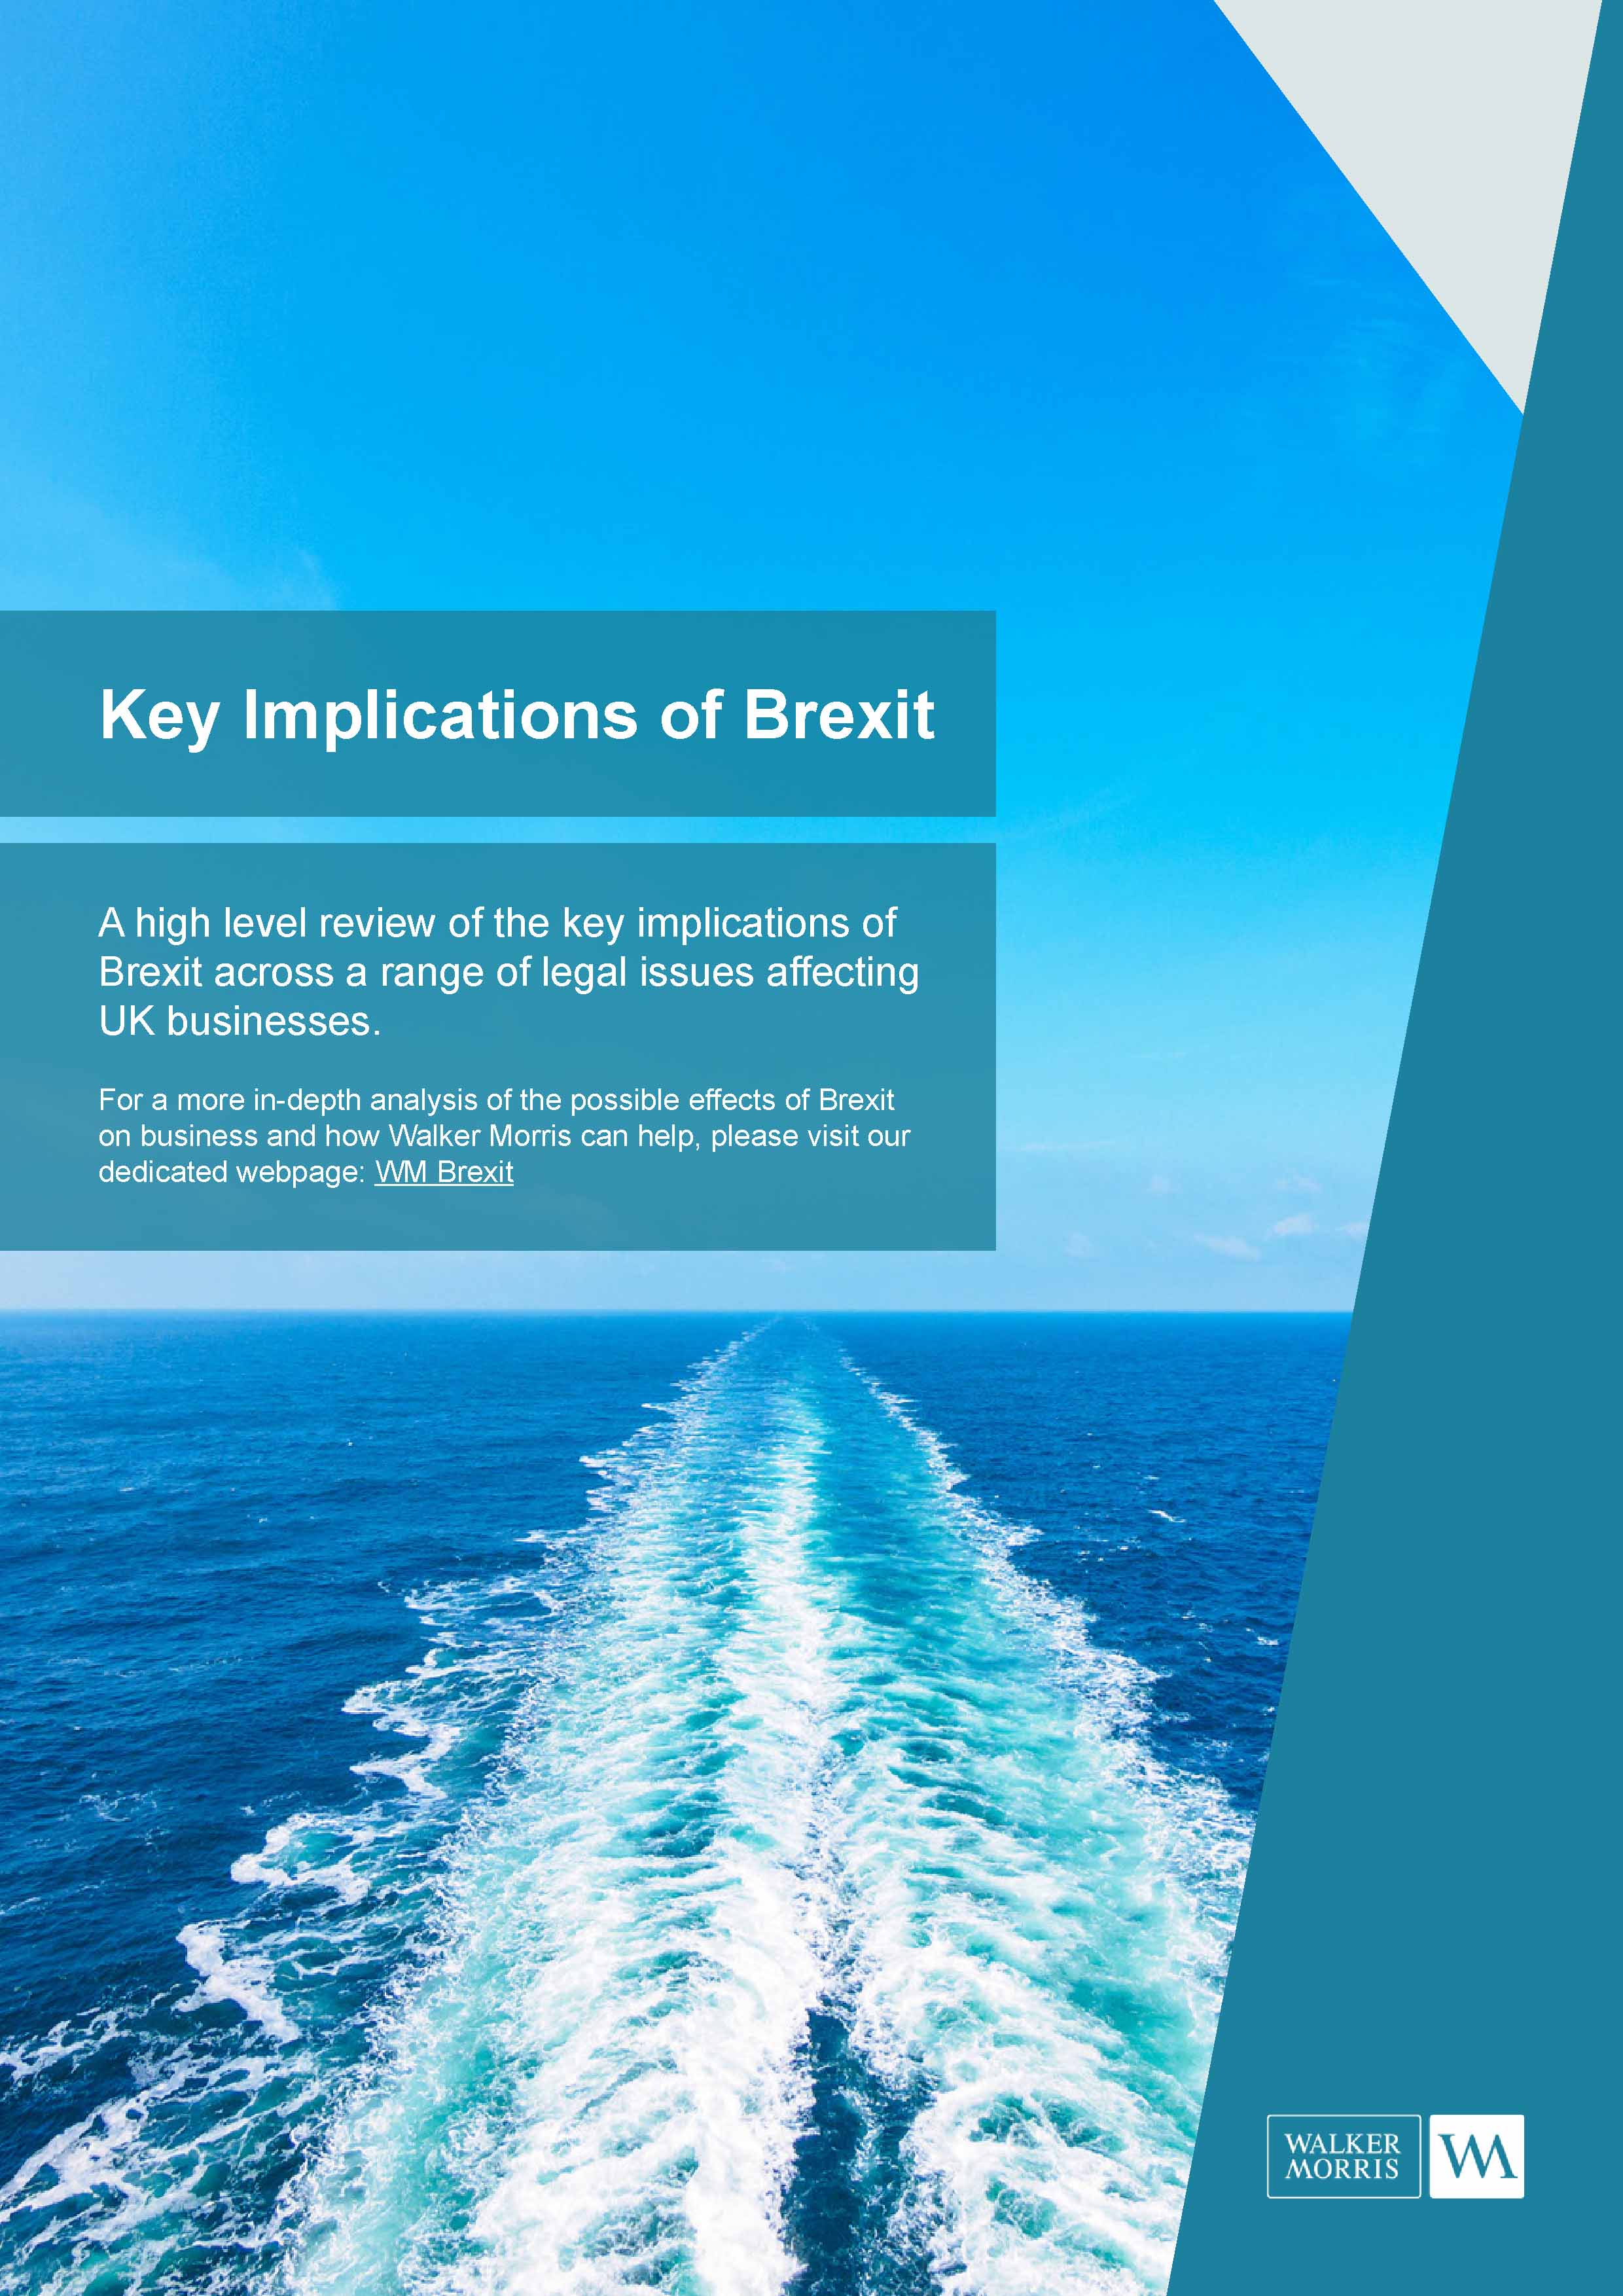 Ships wake with text about key implications of Brexit and Walker Morris logo